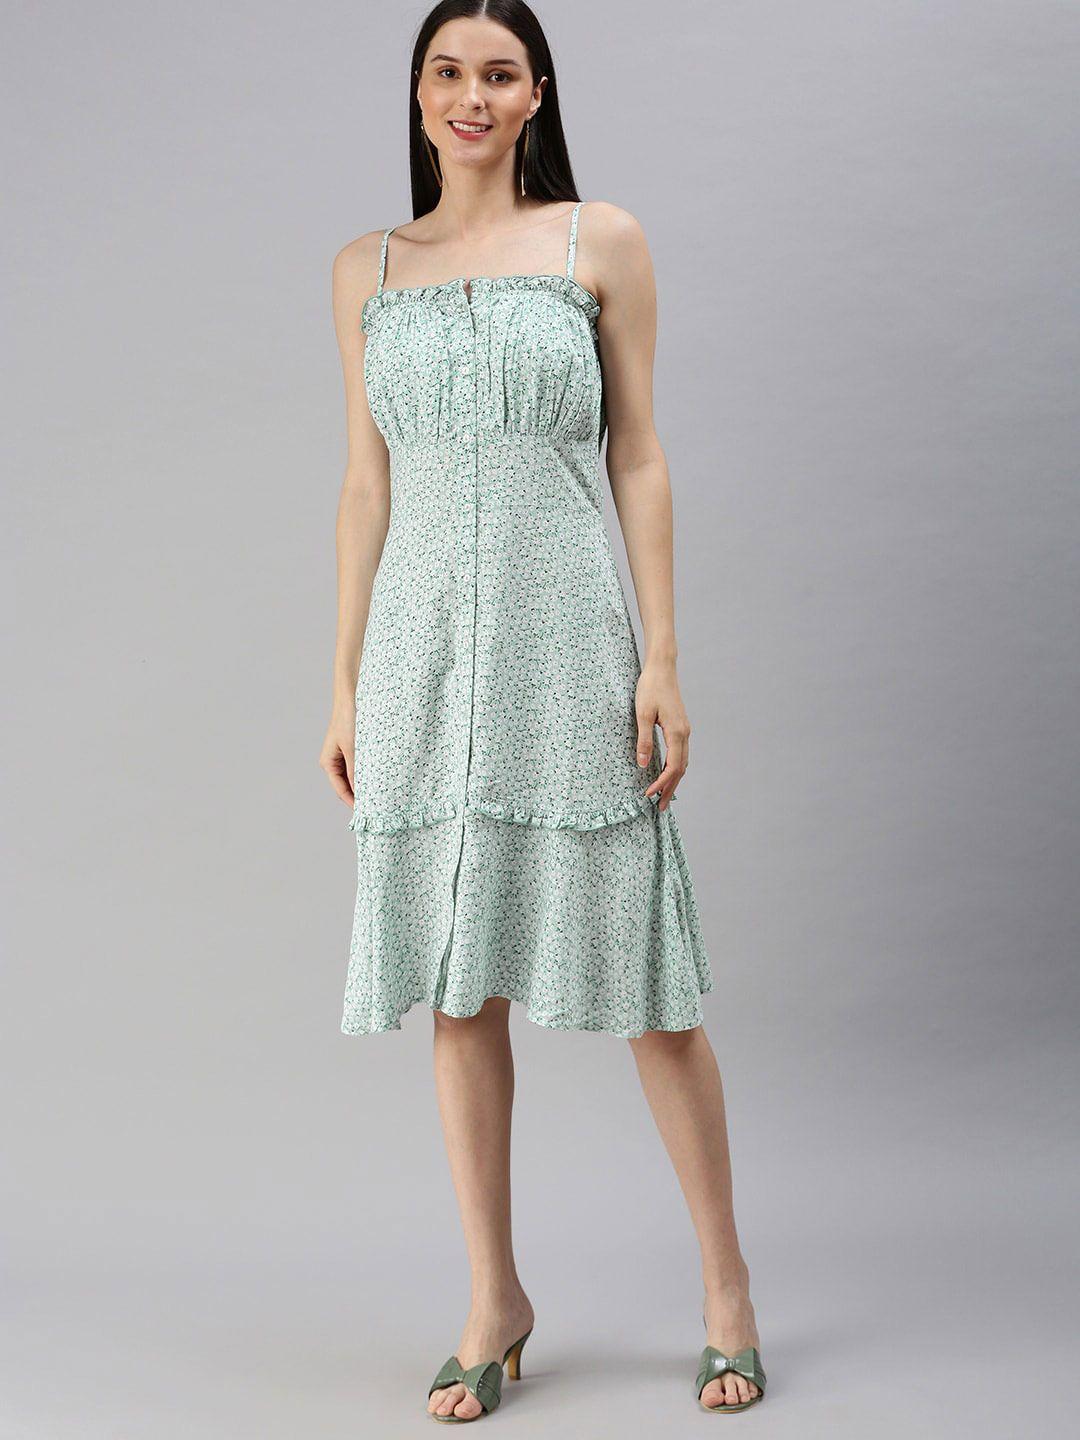 here&now sea green & white floral printed sleeveless ruffled a-line dress